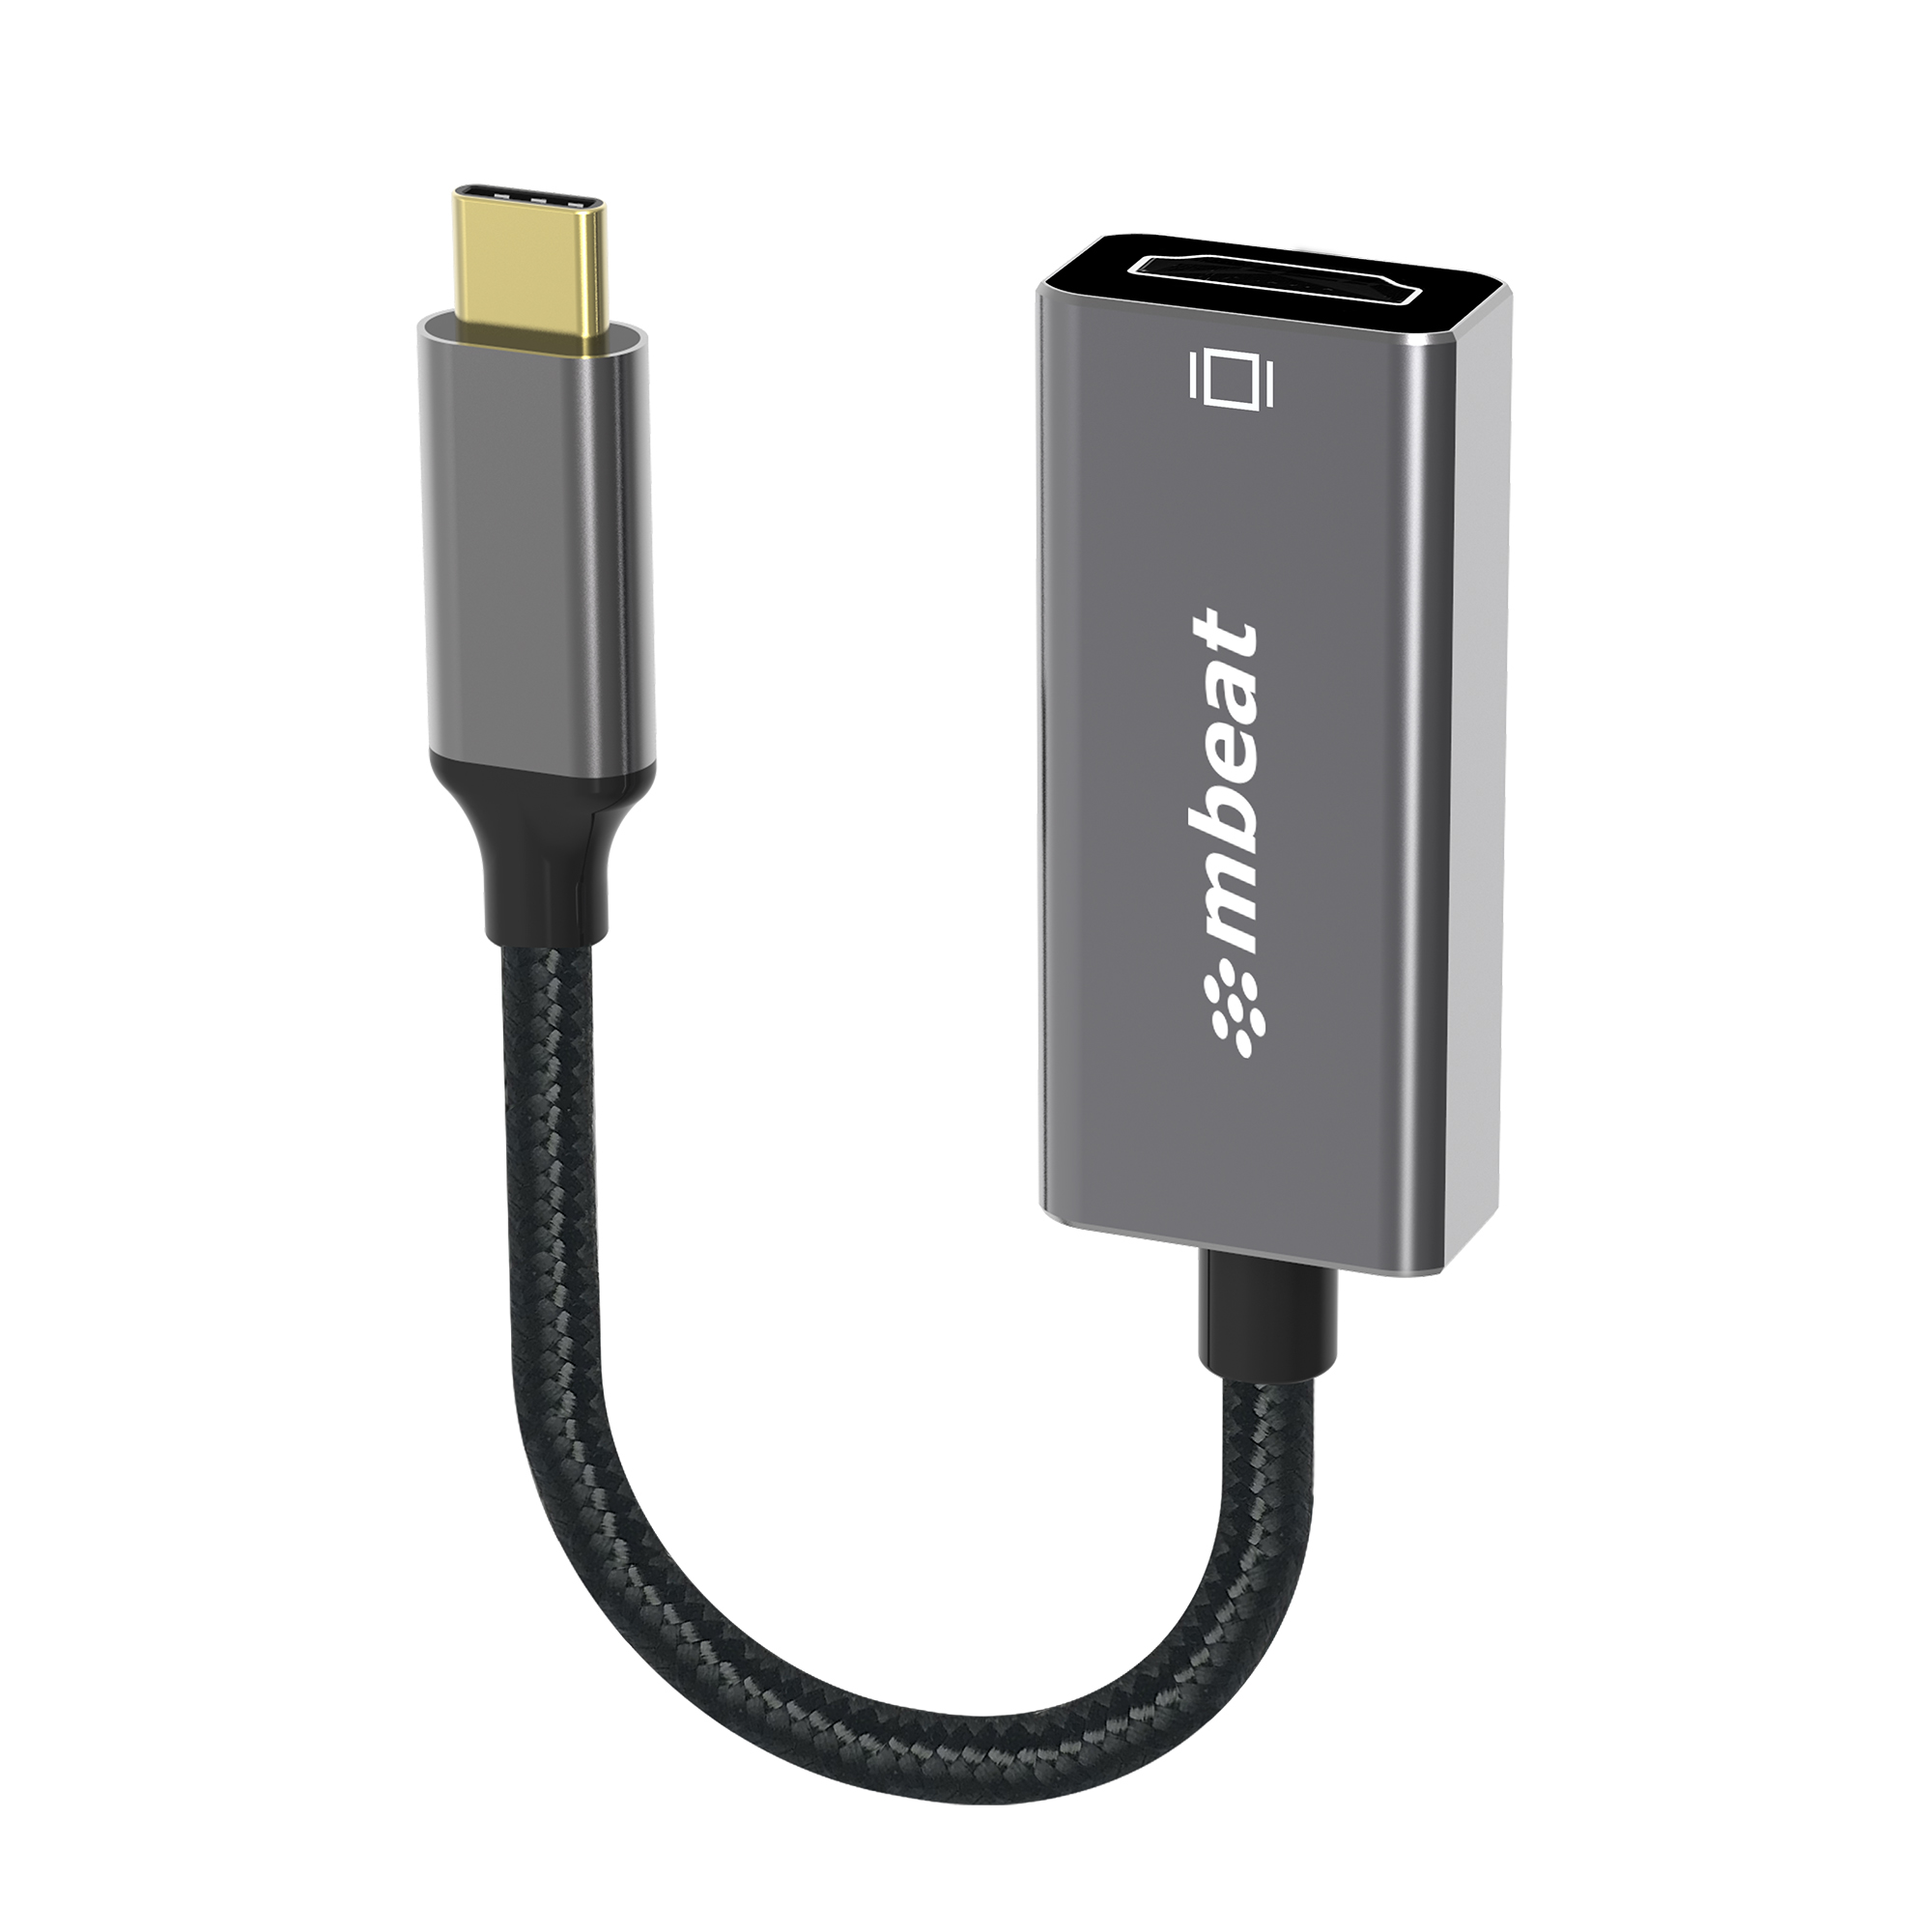 MBEAT Tough Link 1.8m Display Port Cable v1.4 – Connects Computer, Laptop to HDTV, Monitor, Gaming Console, Supports 8K@60Hz (7680×4320) – Space Grey